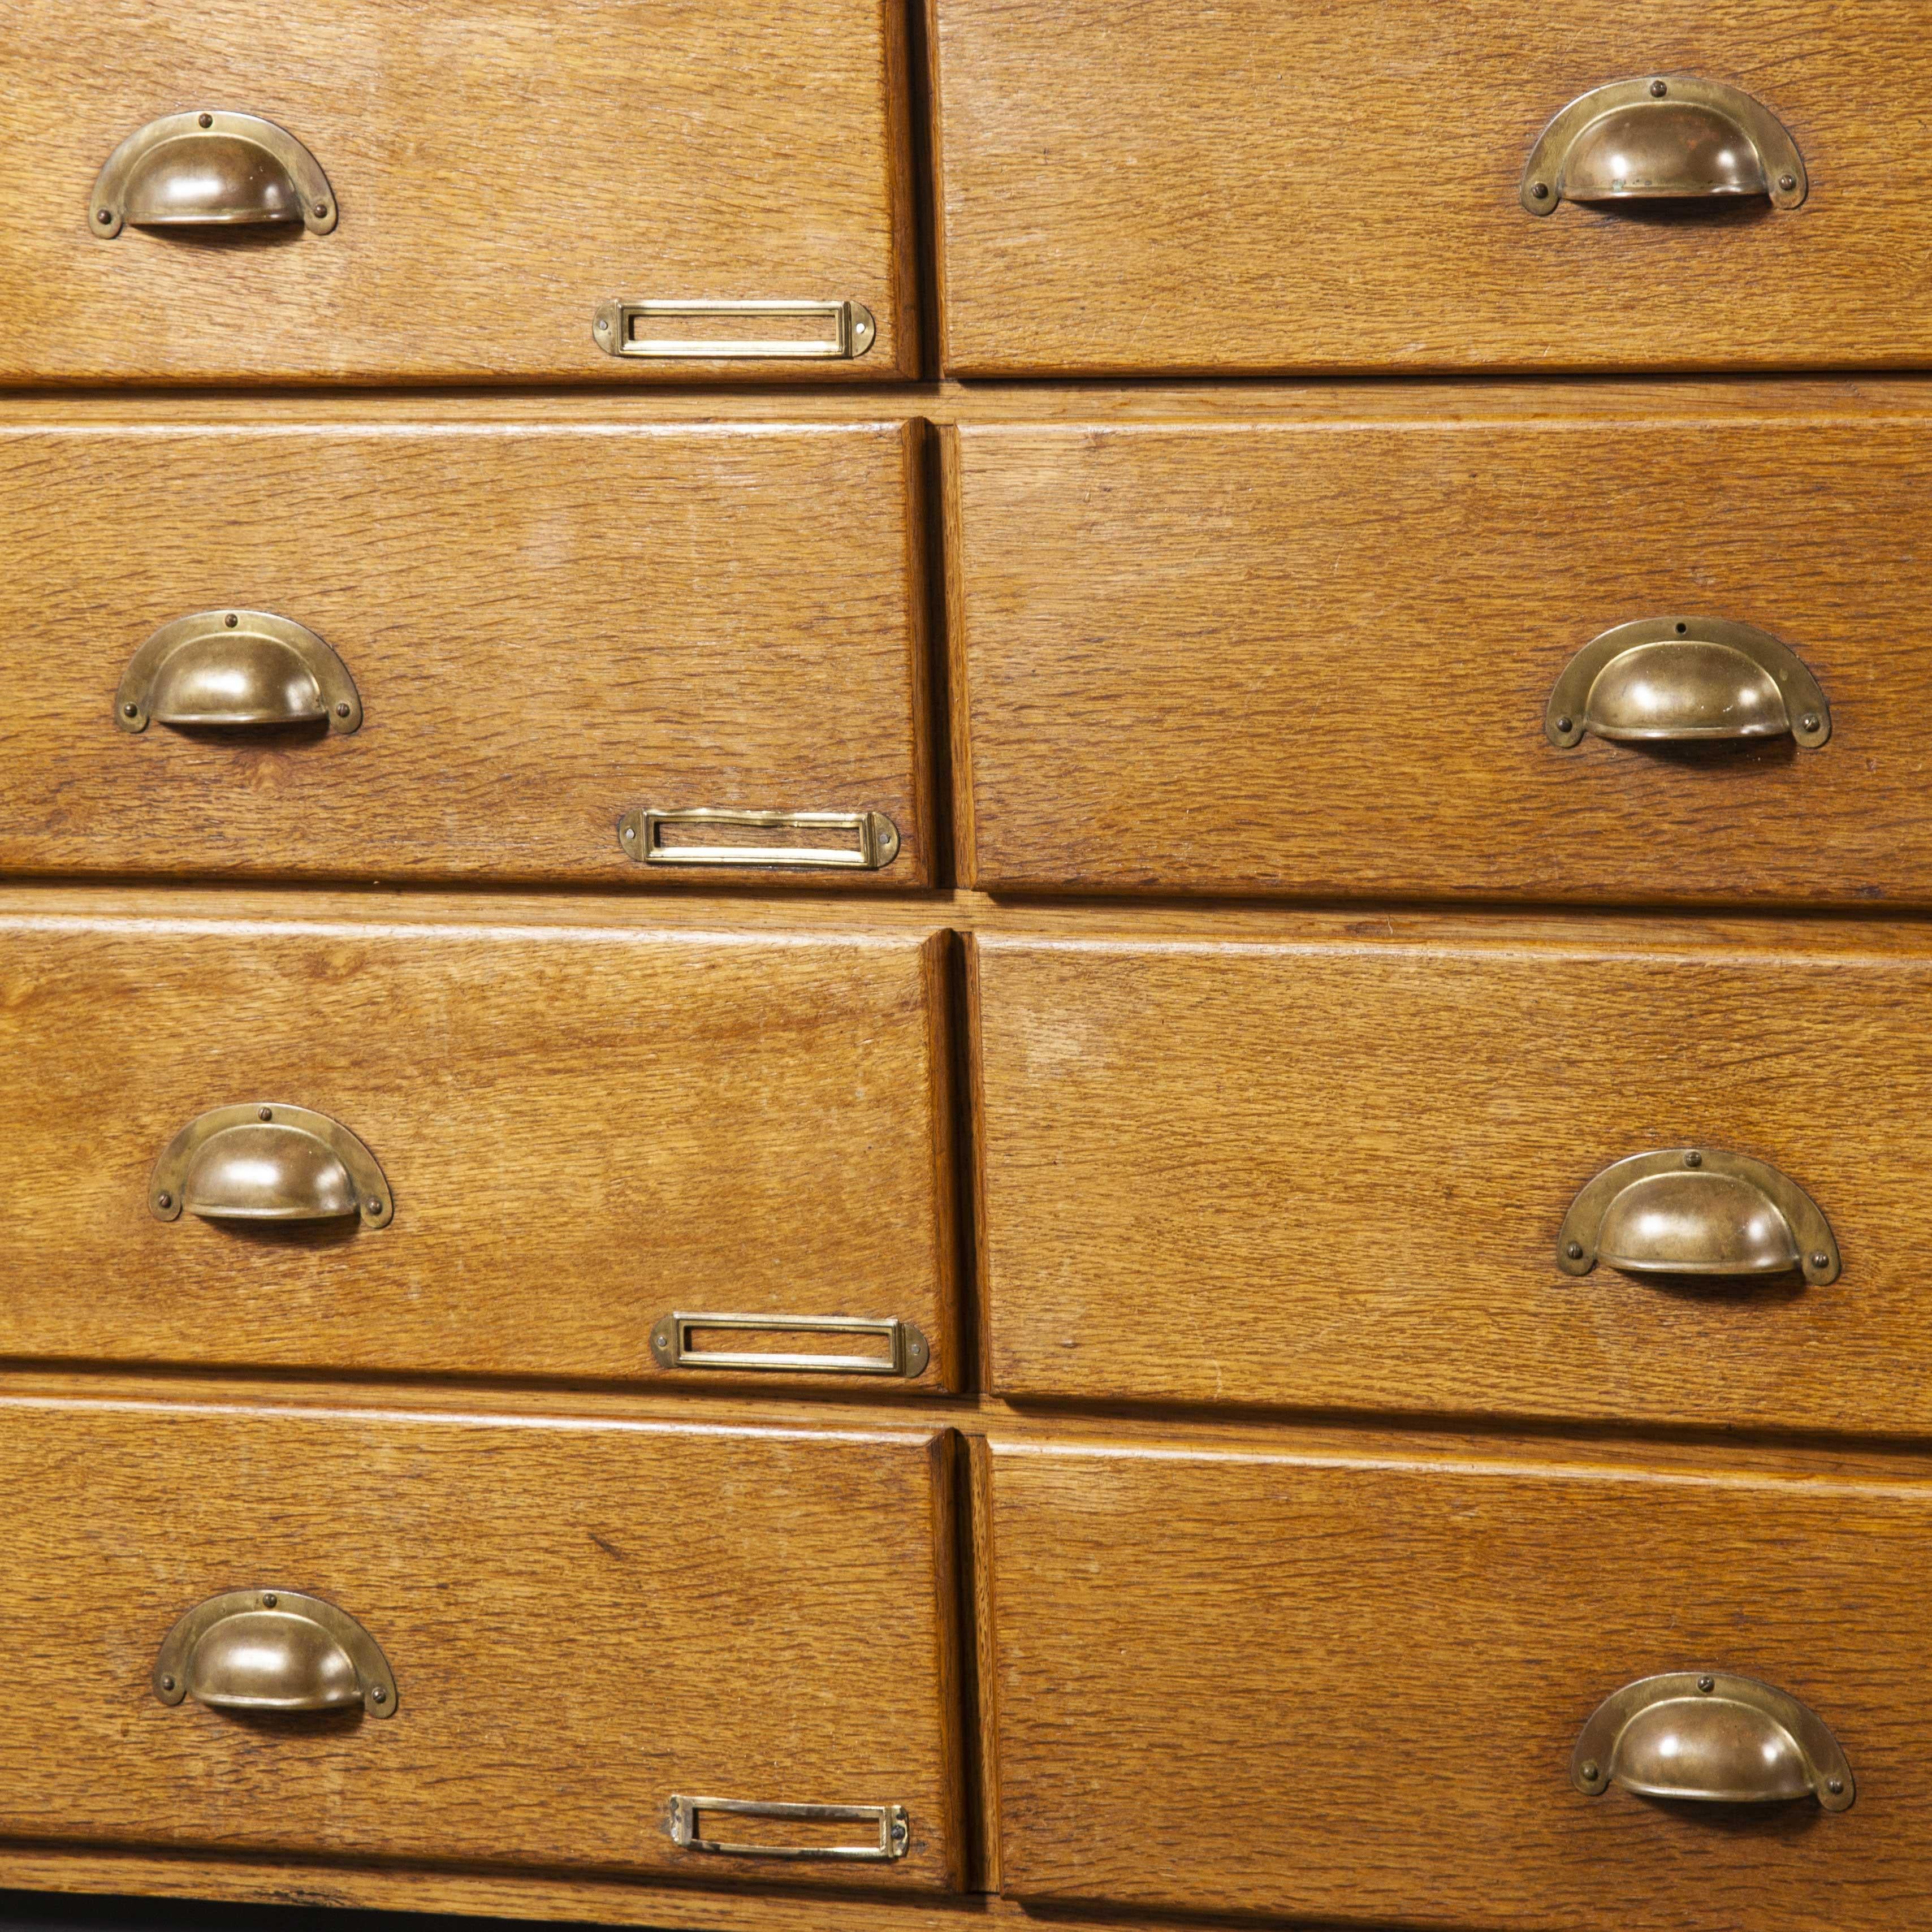 1950s Long oak drapers shop bank of drawers – Chest of drawers
1950s Long oak drapers bank of drawers – Chest of drawers. Sourced from southern Germany this is a very long chest at just over 2.6m. The length of the piece allowed shop keepers to